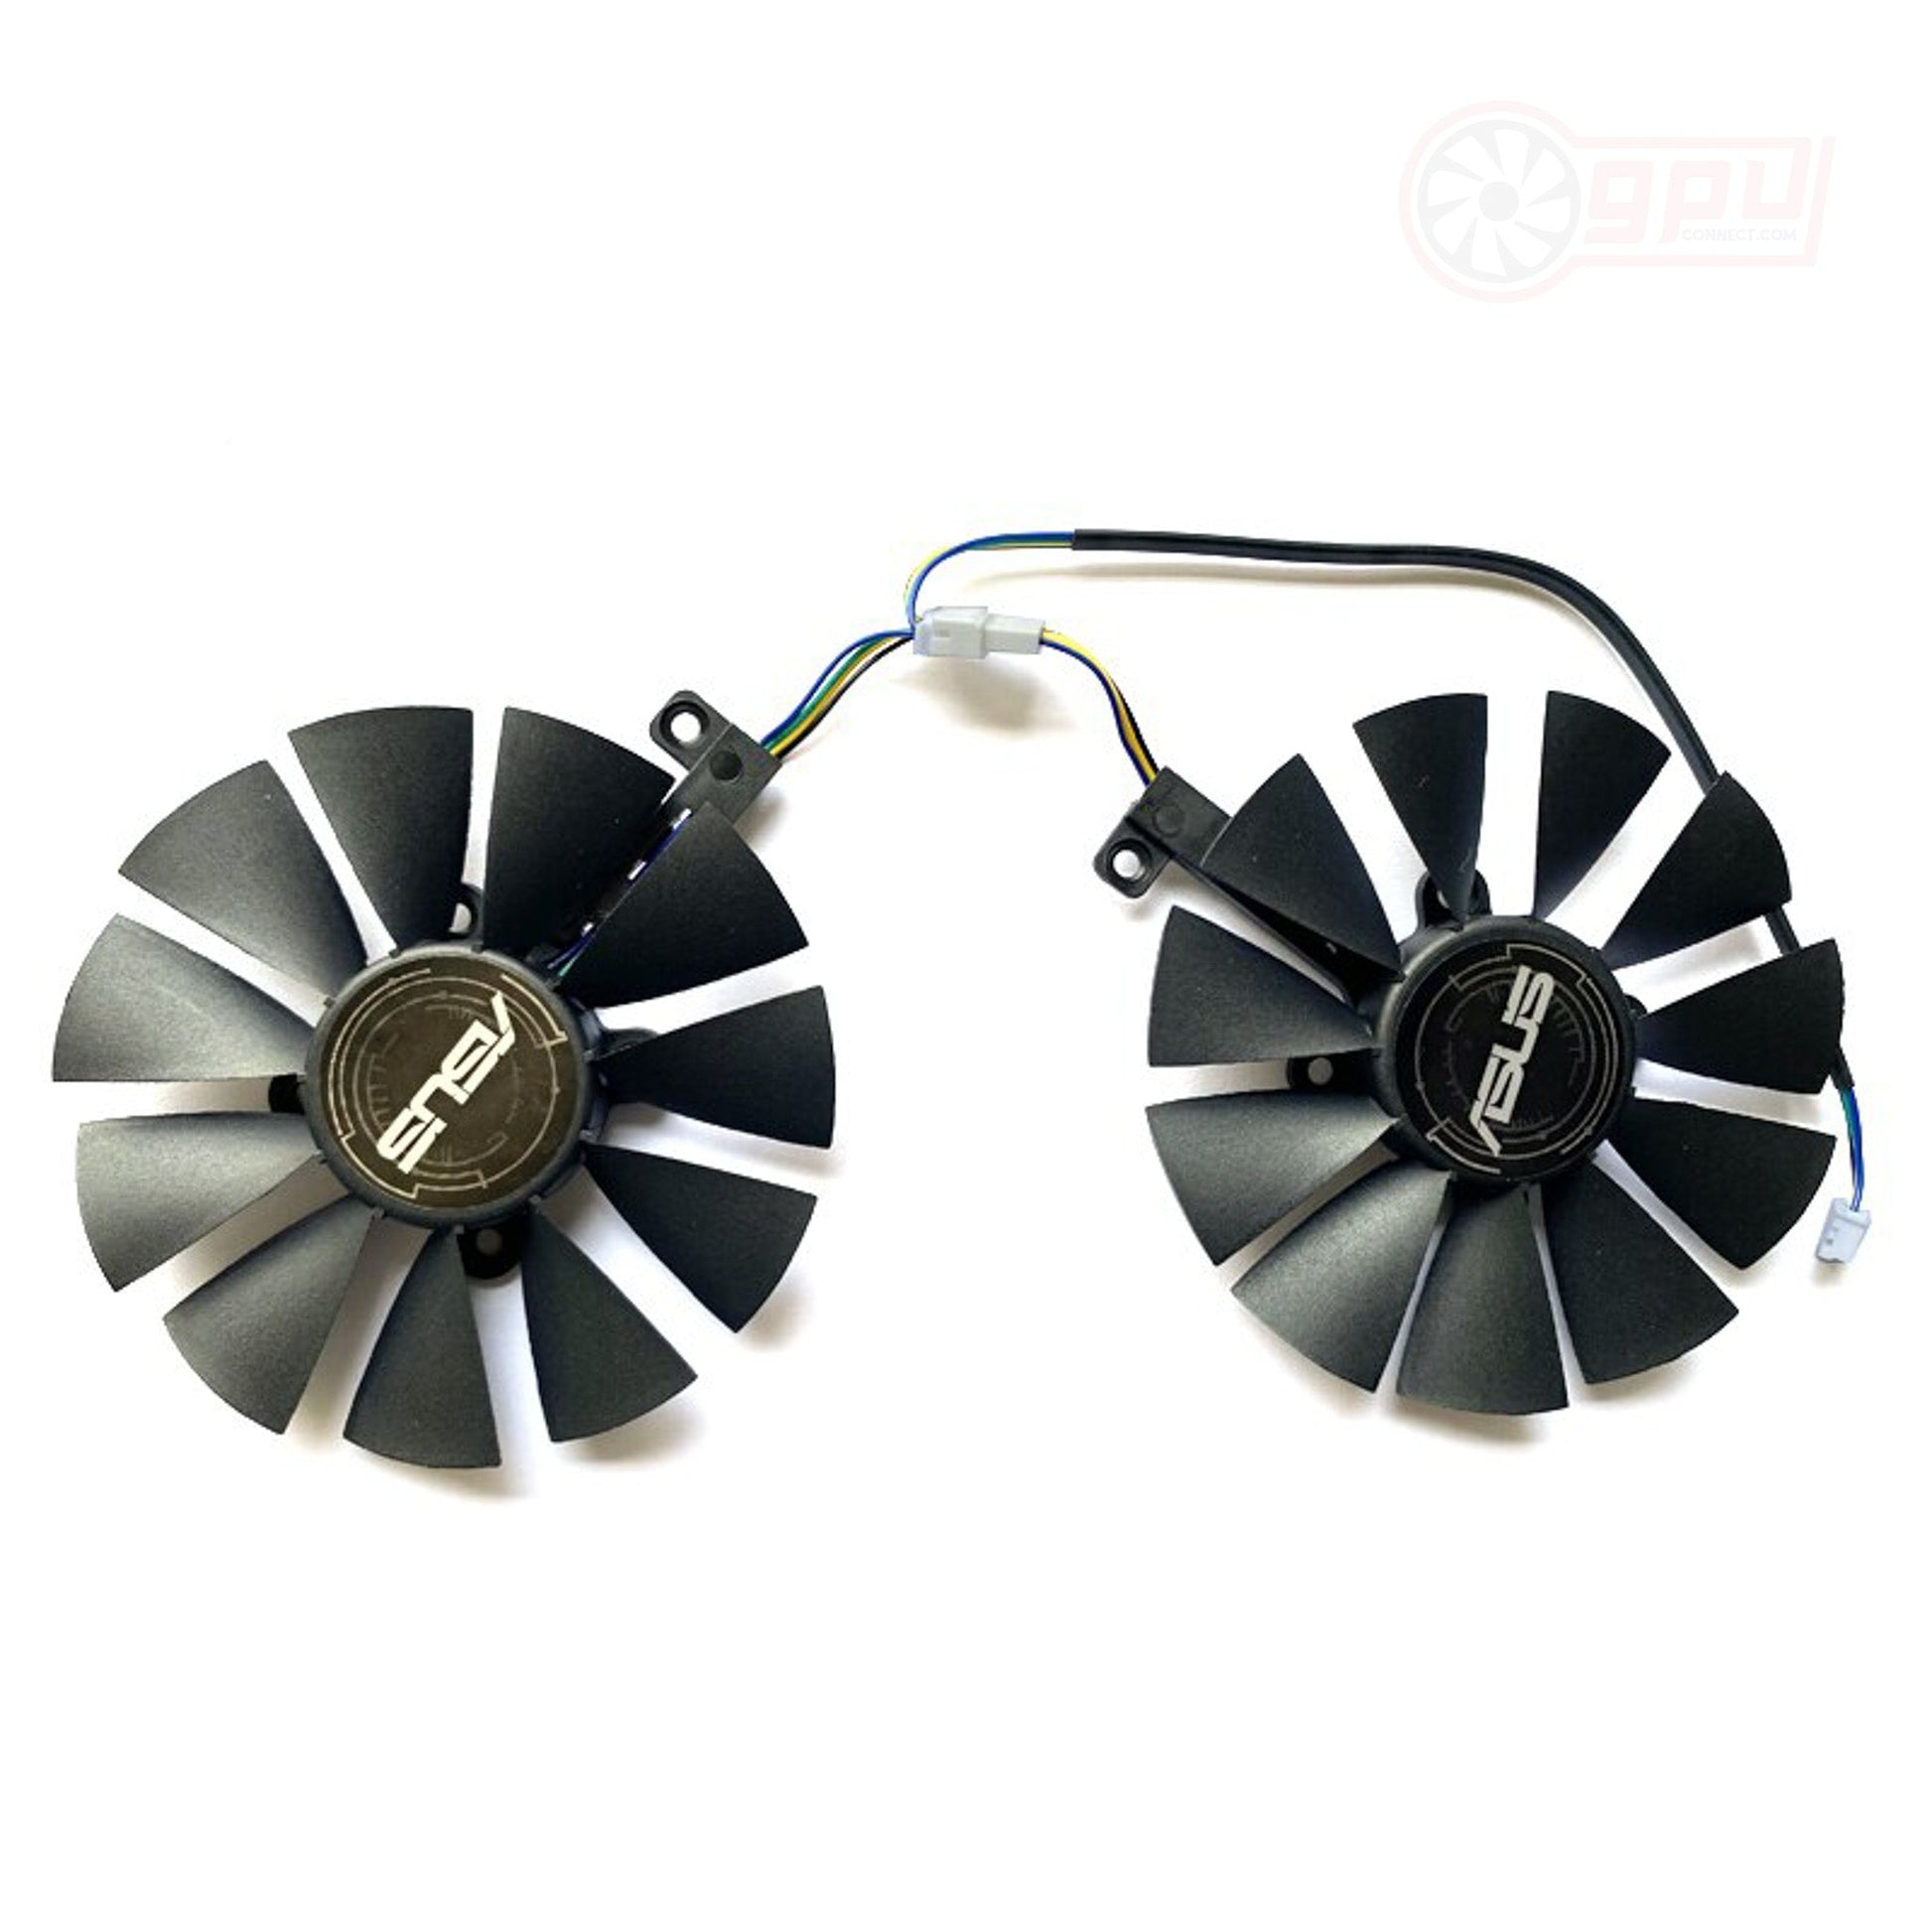 ASUS AREZ RX 580 570 470 Mining Expedition OC Replacement Fan - GPUCONNECT.COM